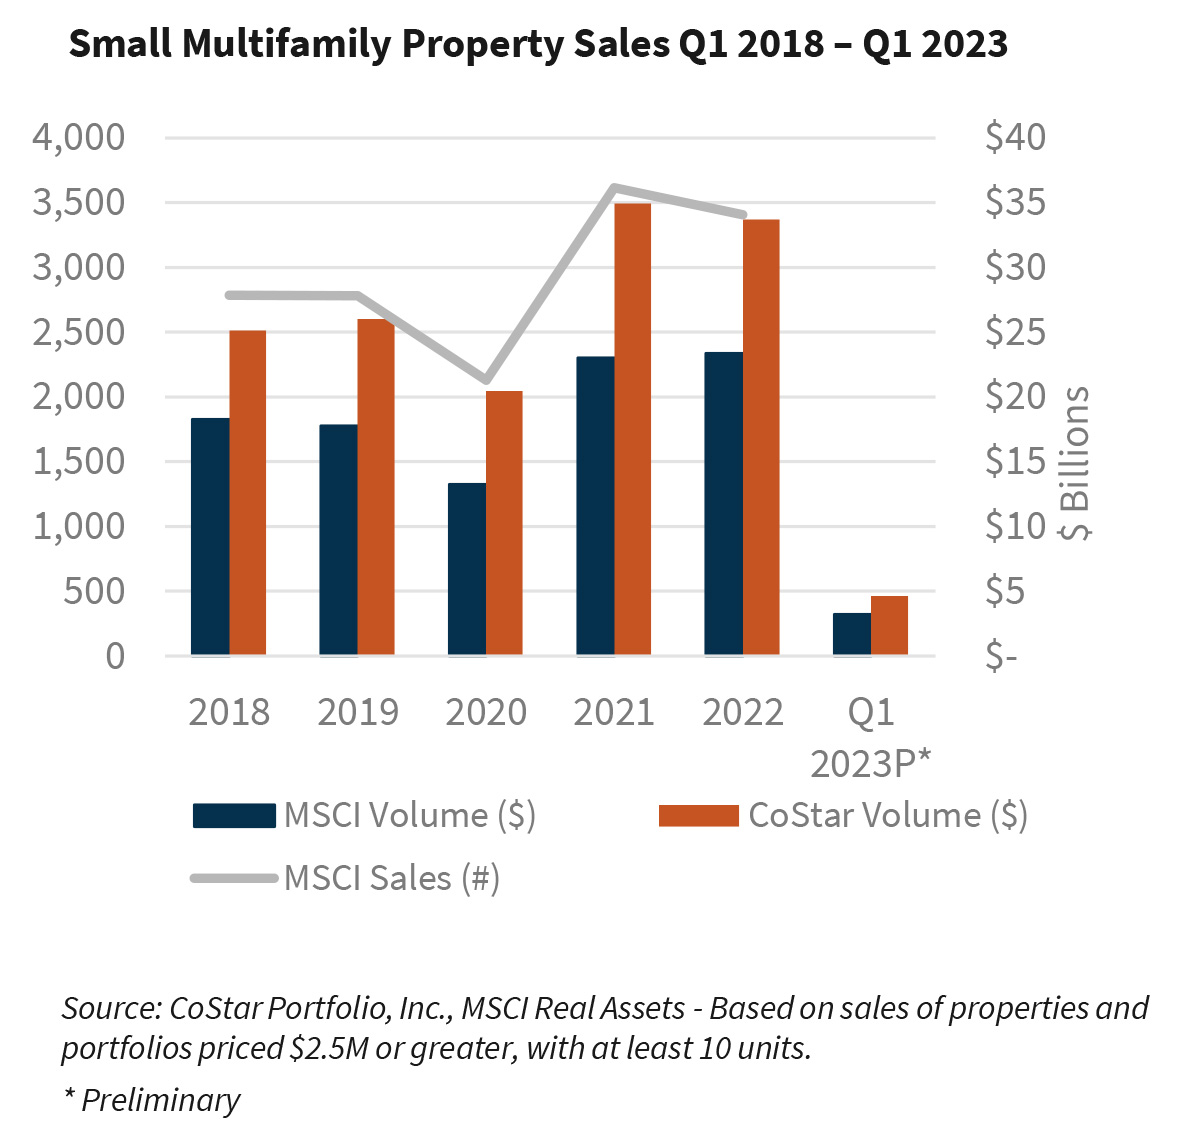 Small Multifamily Property Sales Q1 2018 – Q1 2023